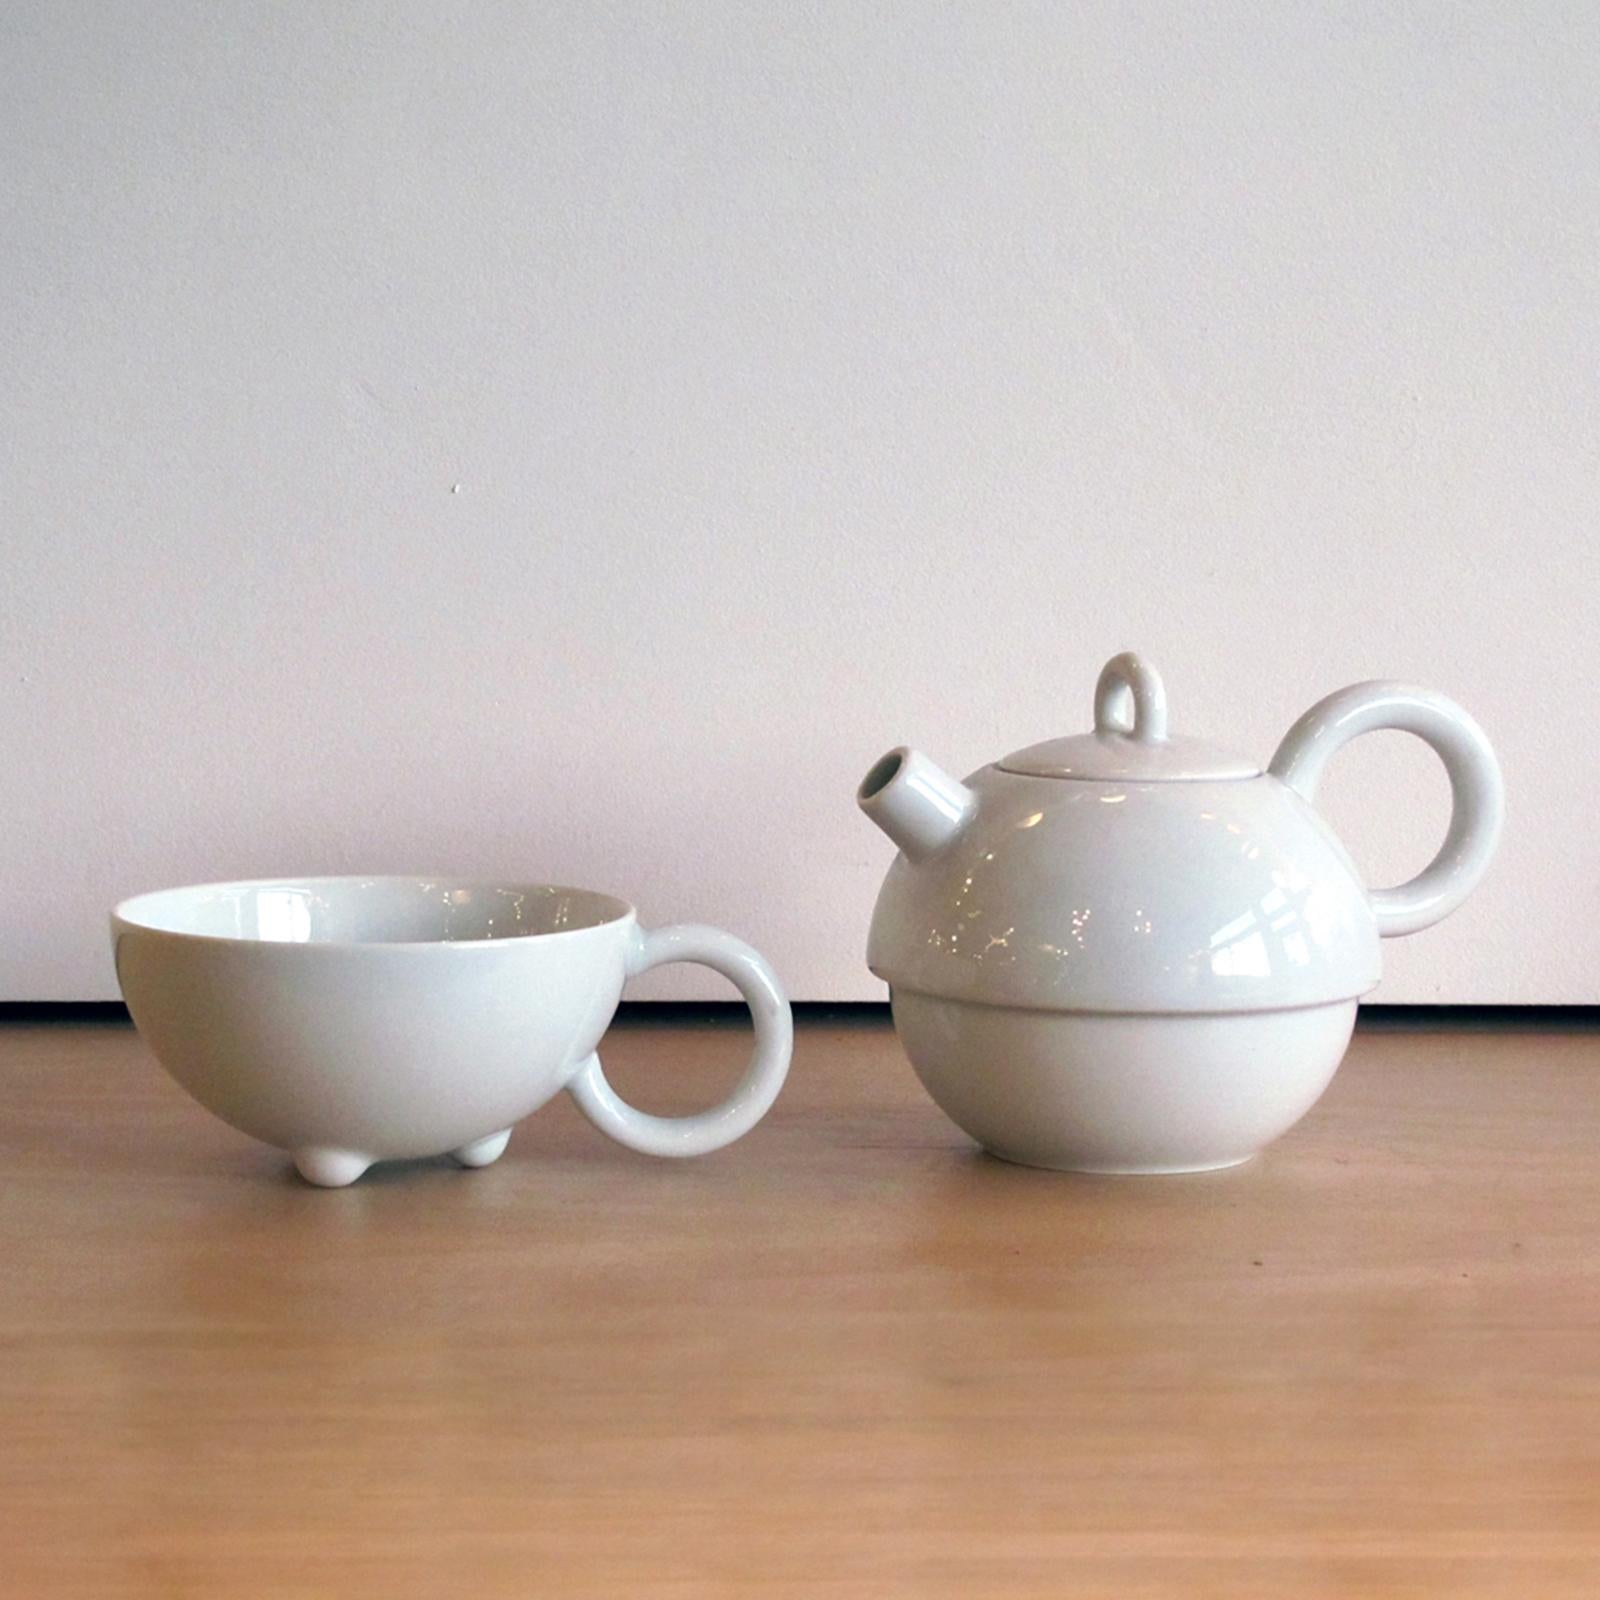 German Matteo Thun for Arzberg Tea-for-One Set, 1980 For Sale